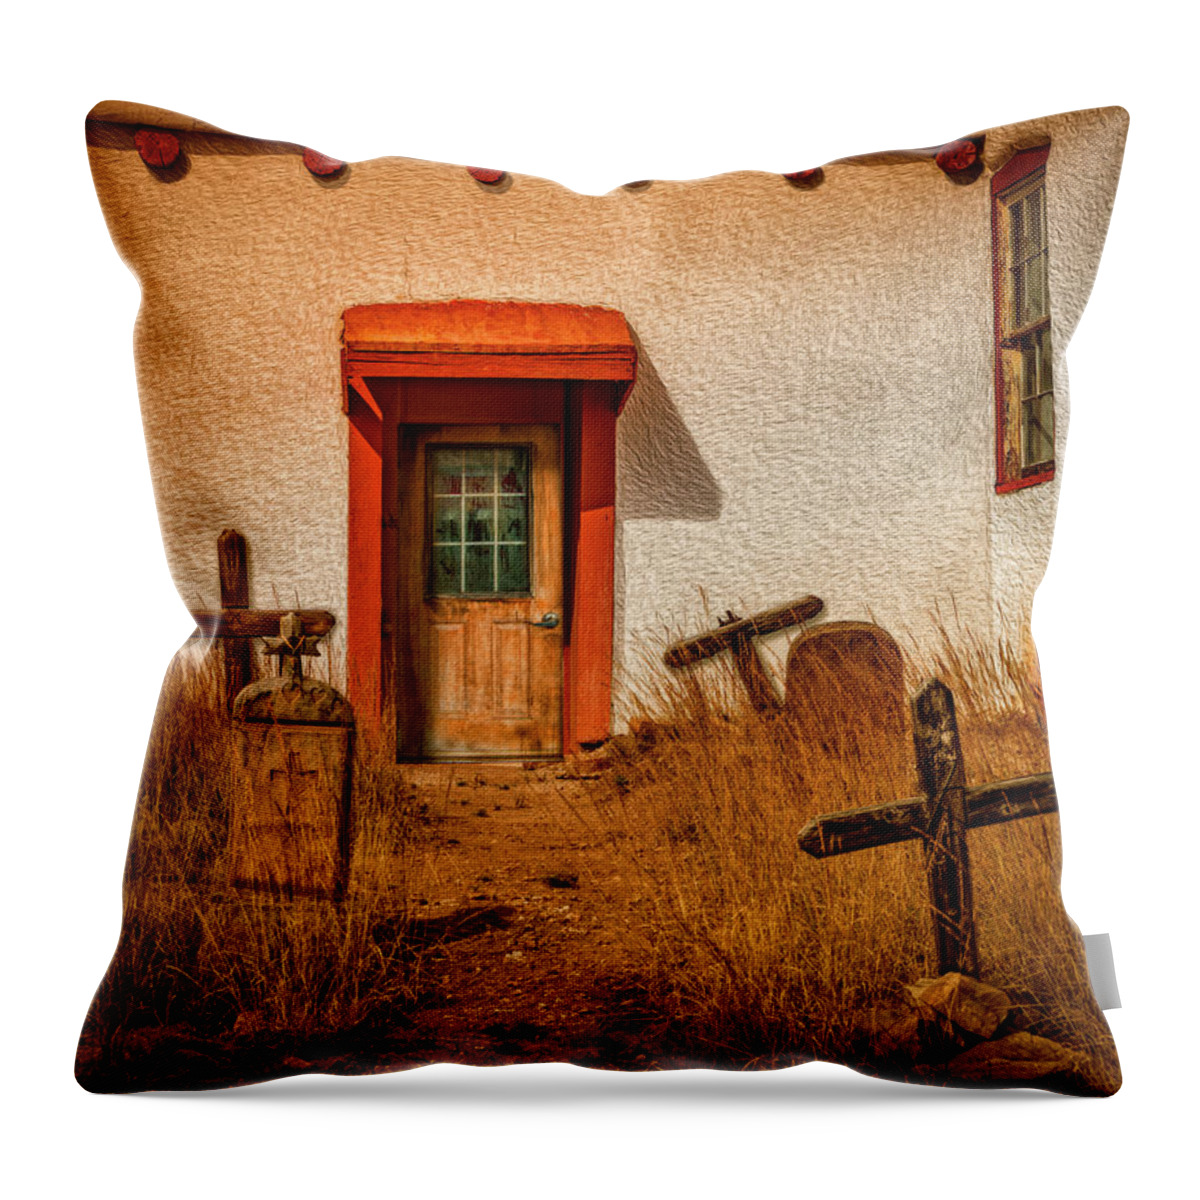 Canoncito Church Throw Pillow featuring the photograph The Forgotten by Paul Wear